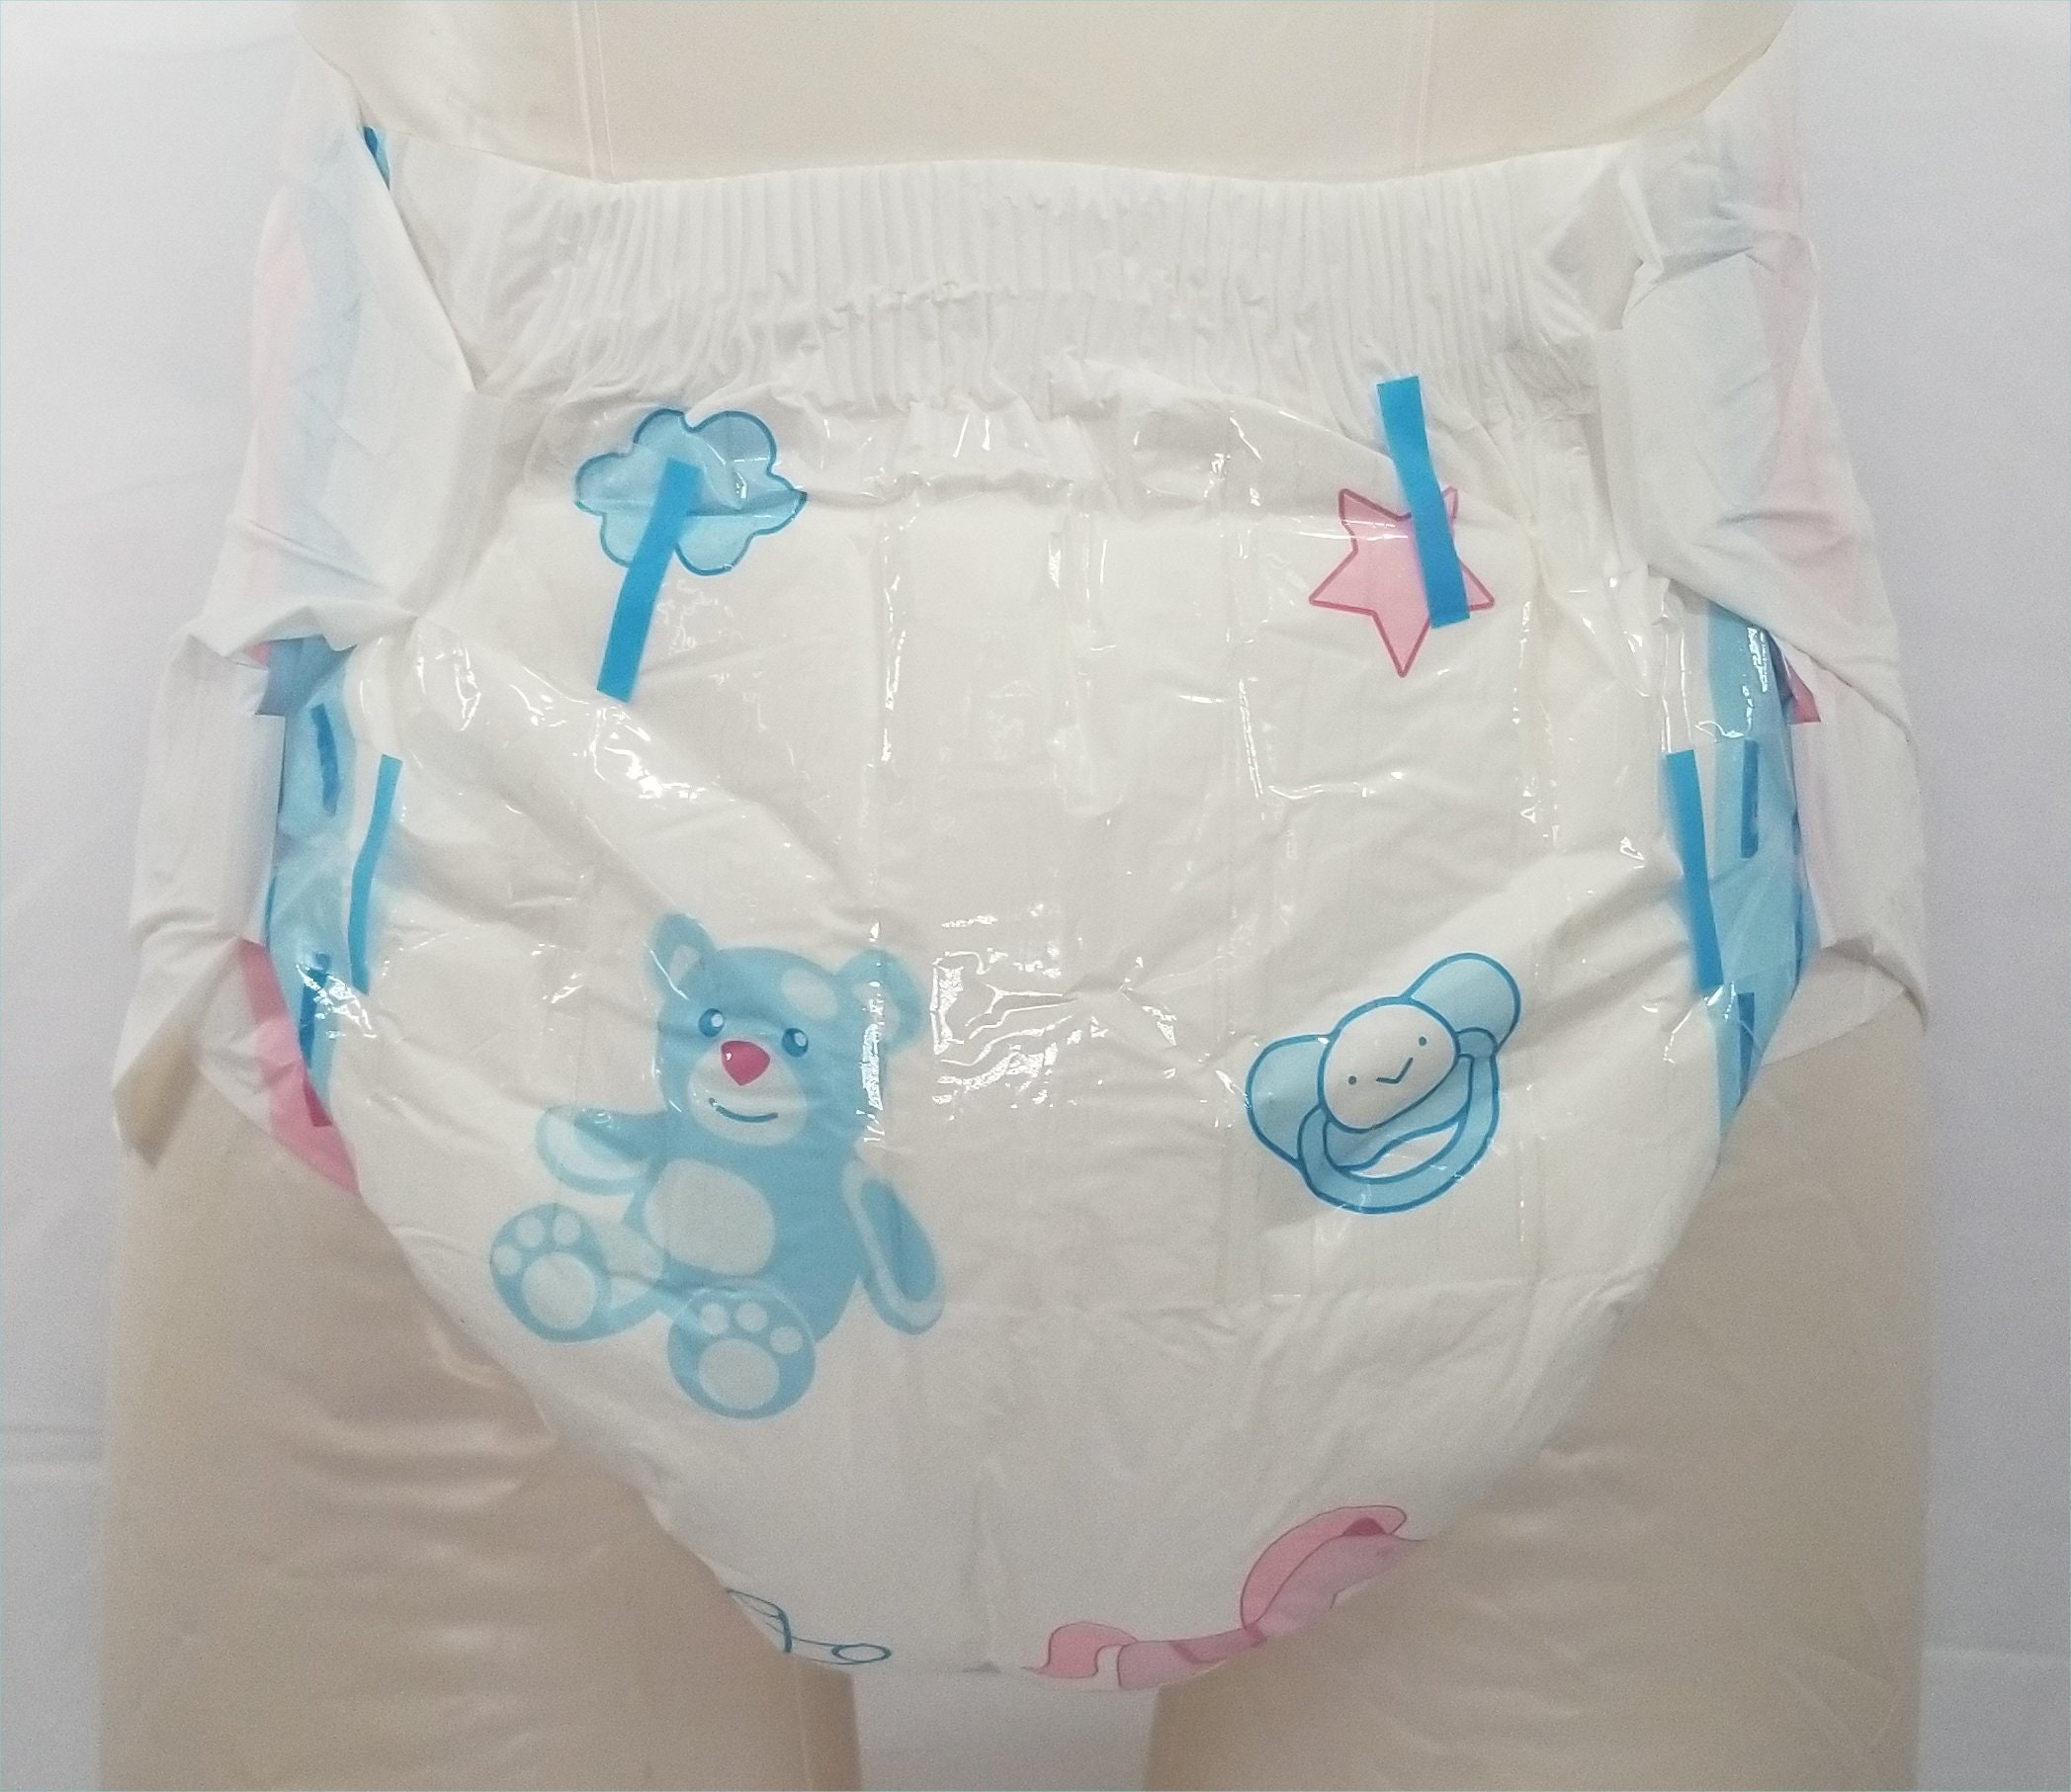 Adult Printed Diapers Cloudry Toys Large 3650 Etsy